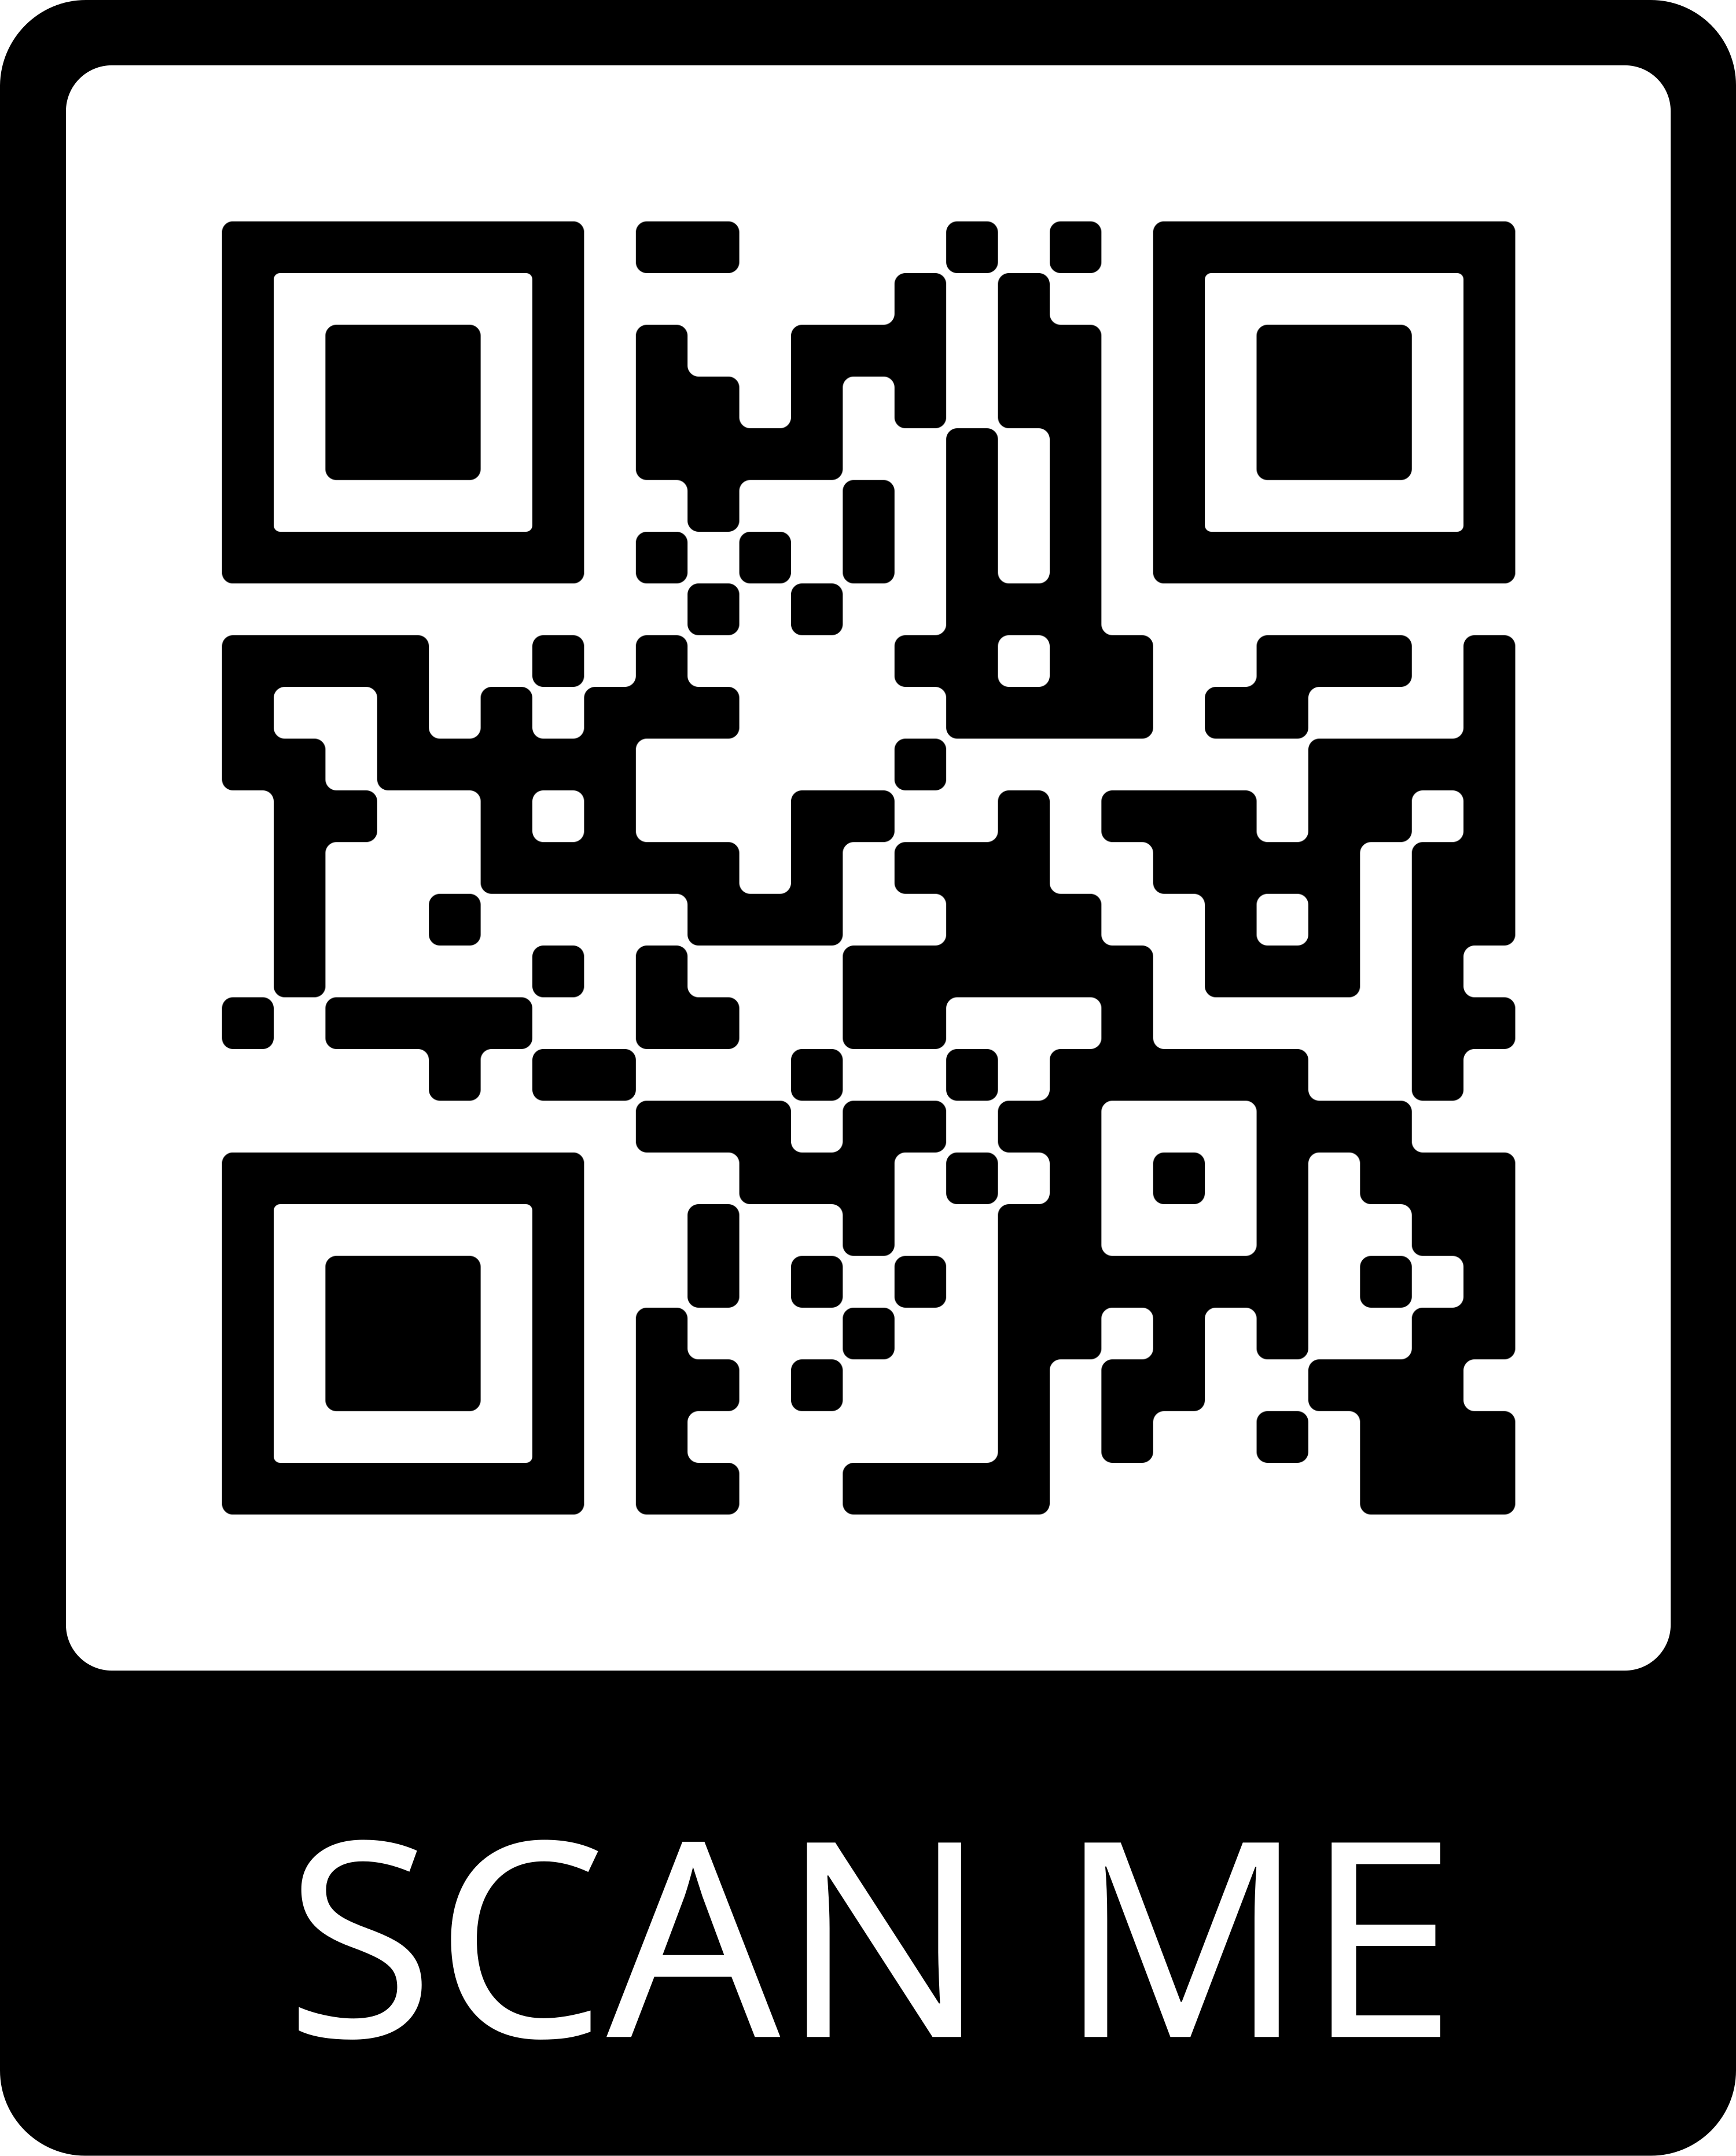 scan this qr code to access the online consultation service accurx